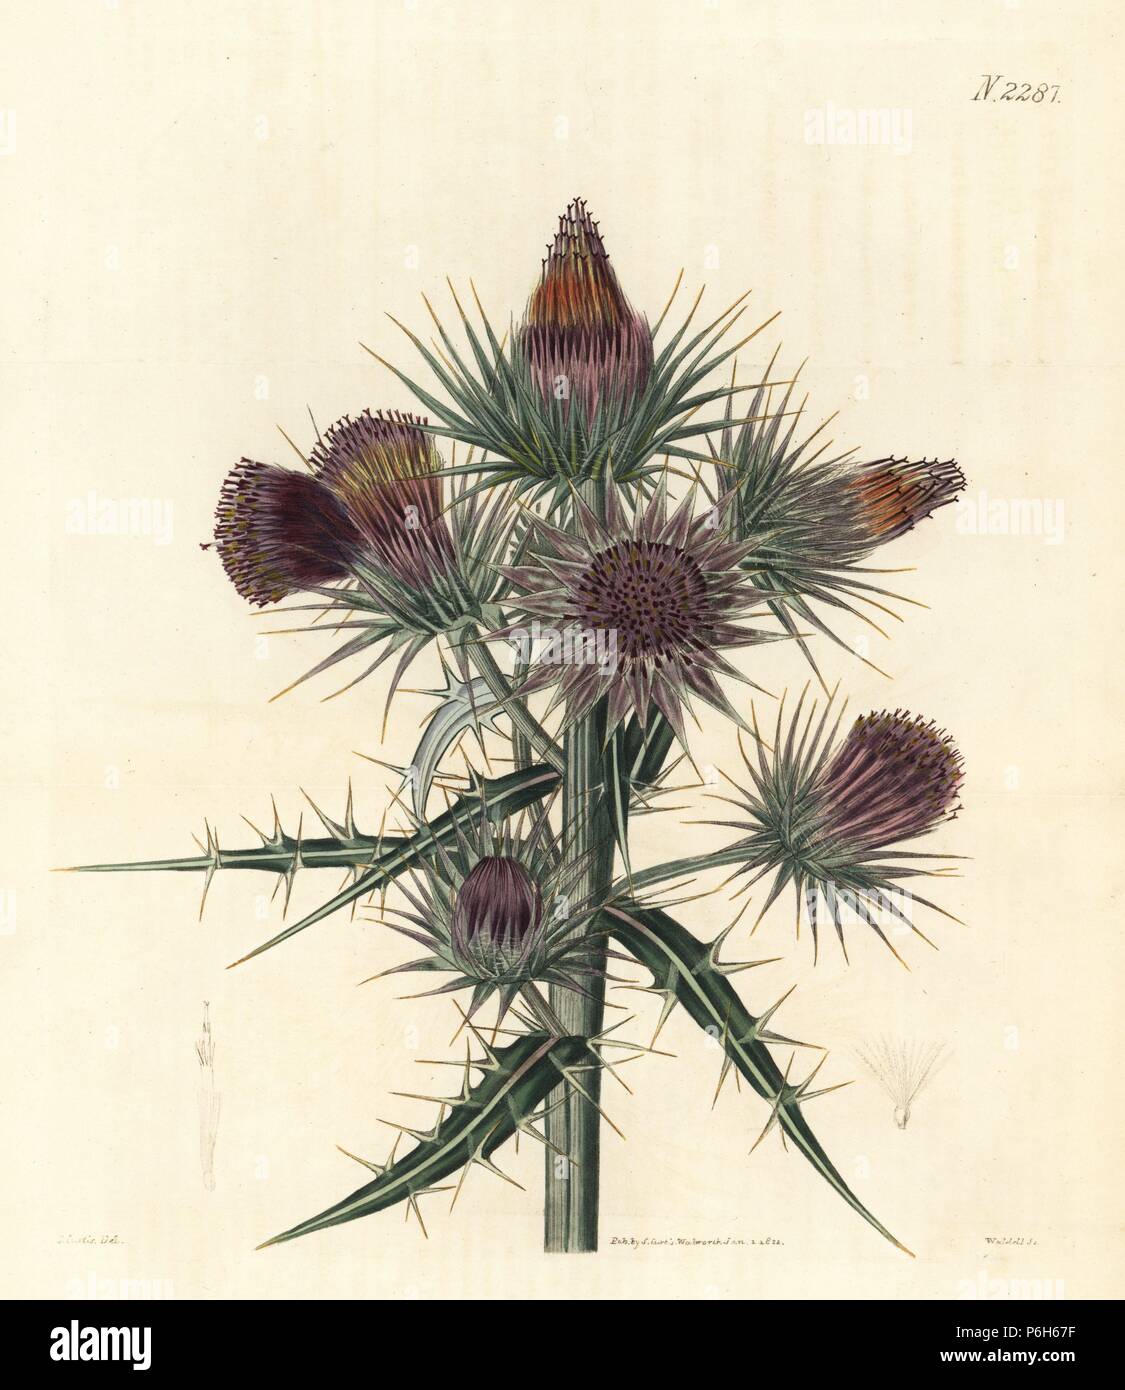 Greek thistle, Ptilostemon afer (Barbary or twin-thorned thistle, Cnicus afer). Handcoloured copperplate engraving by Weddell after an illustration by John Curtis from Samuel Curtis's 'Botanical Magazine,' London, 1822. Stock Photo